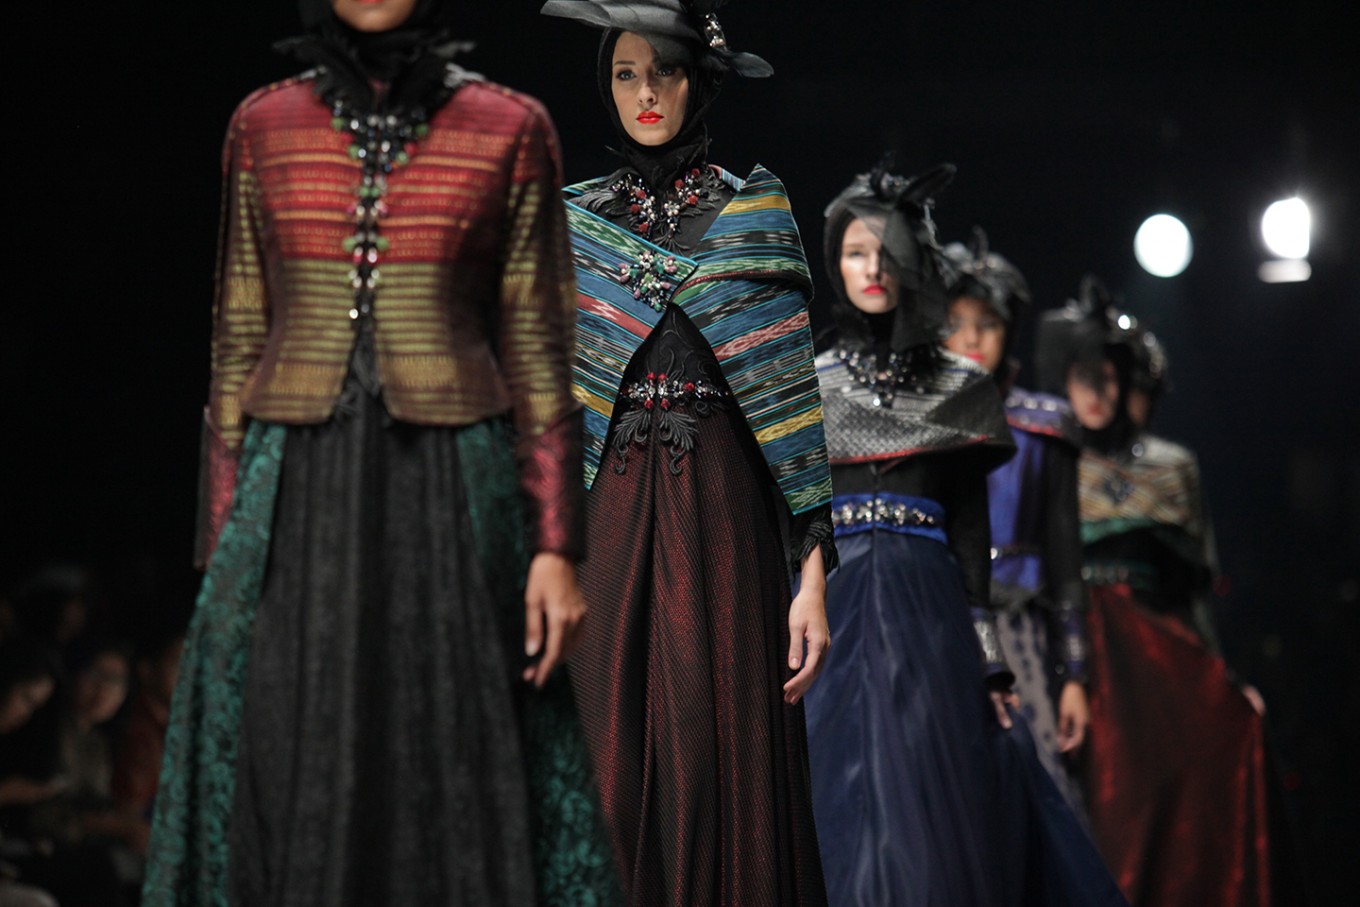 Indonesia fashion week, one out of many attractions | The Jakarta Post